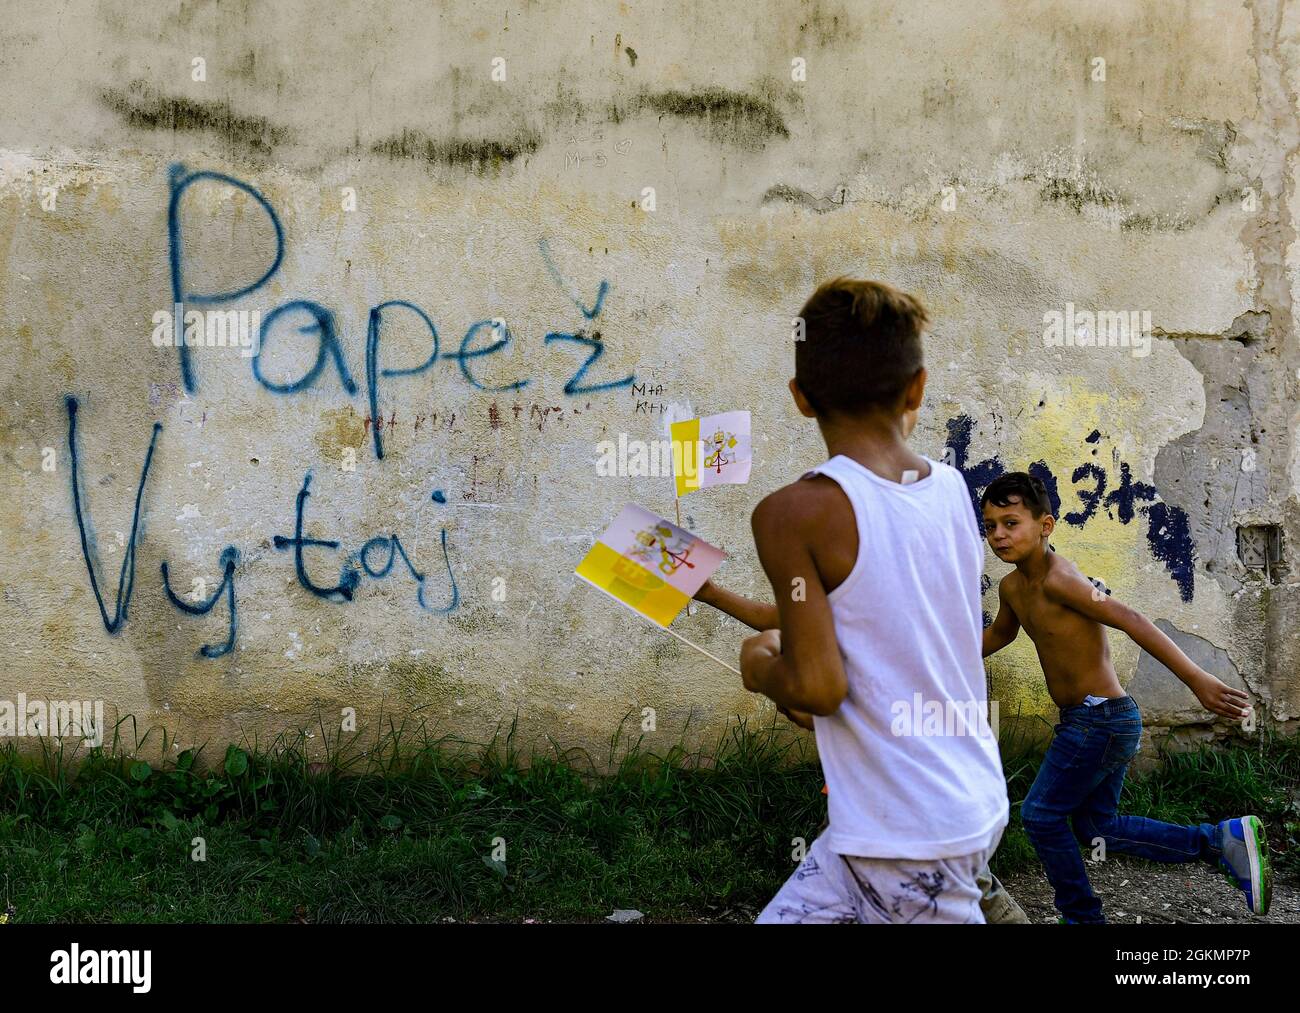 Kosice, Slovakia. 14th Sep, 2021. Boys play in front of the wall with sign 'Pope, welcome' at biggest Slovak Roma housing estate Lunik IX in Kosice before Pope Francis arrival to meet members of the Roma community, Slovakia, September 14, 2021, during his four-day visit to Slovakia, which started on Sunday. Credit: Roman Vondrous/CTK Photo/Alamy Live News Stock Photo